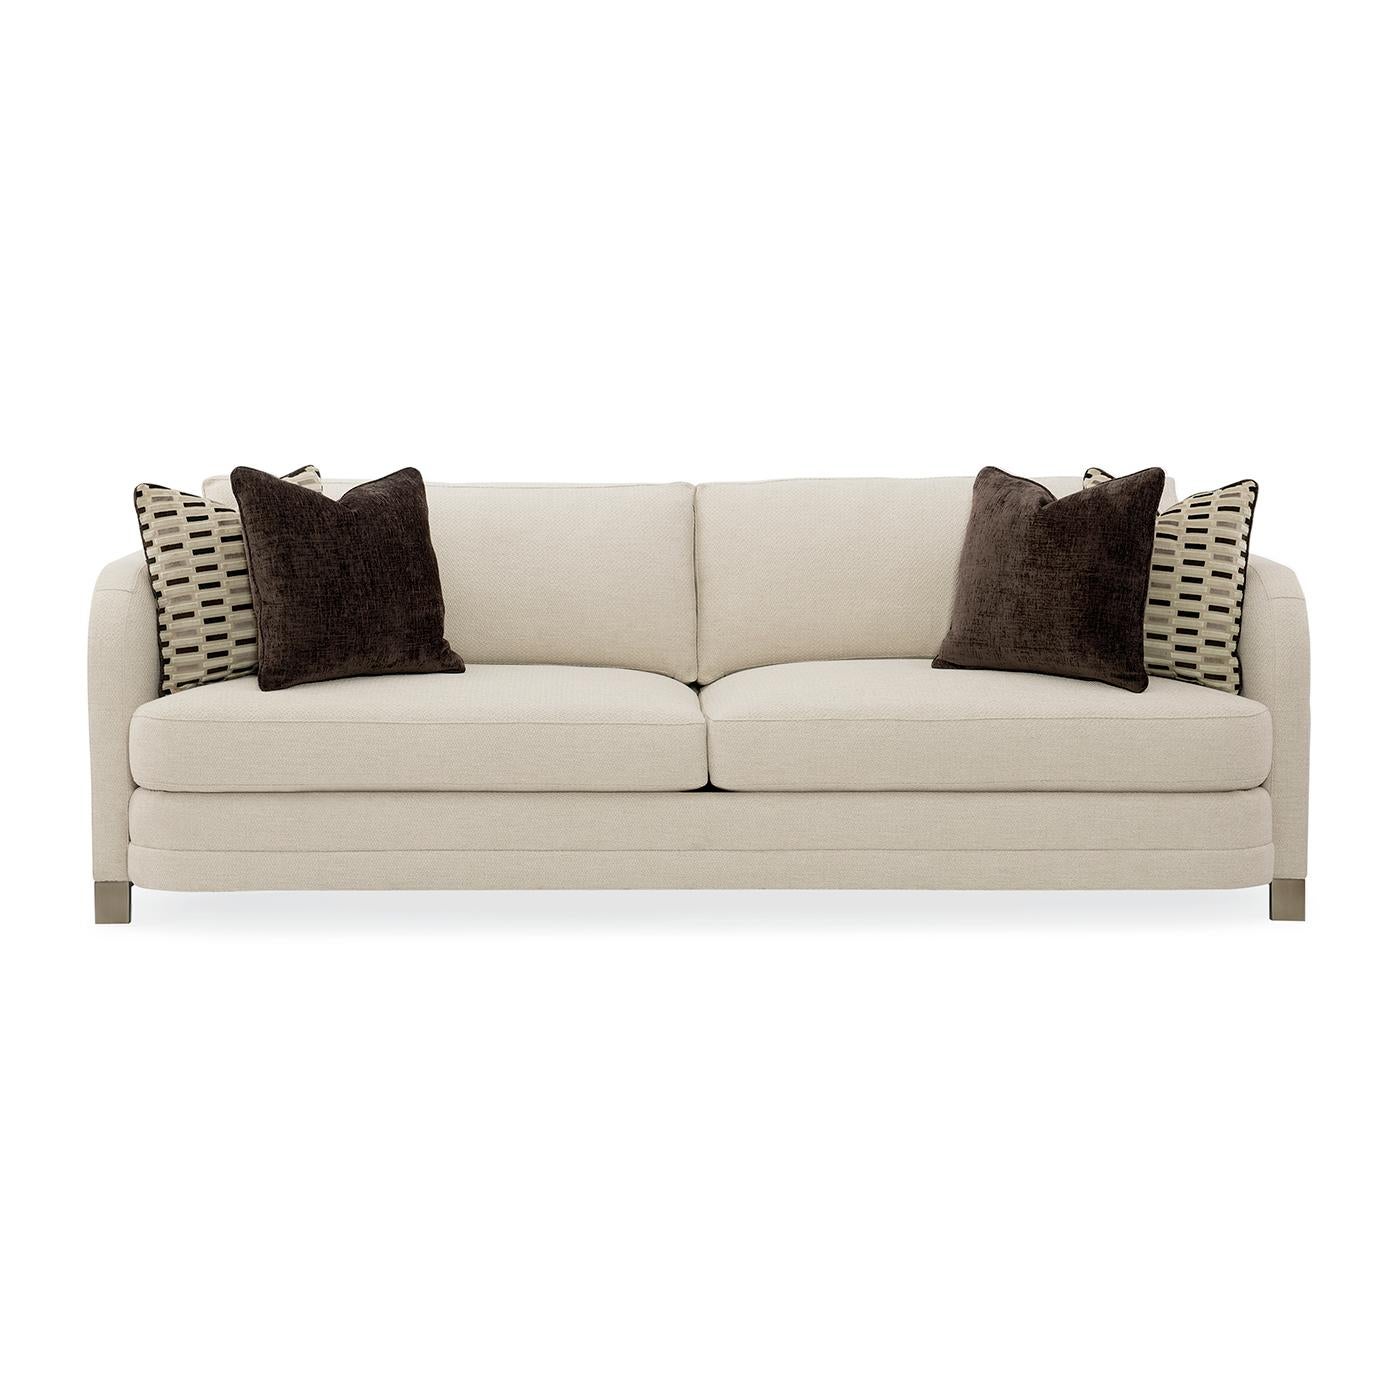 The streamlined appeal of this low, modern sofa comes from its generously curved features. The piece has a refined profile with a sophisticated rounded frame that welcomes you to sit and relax. Fully upholstered in a textured, creamy basketweave